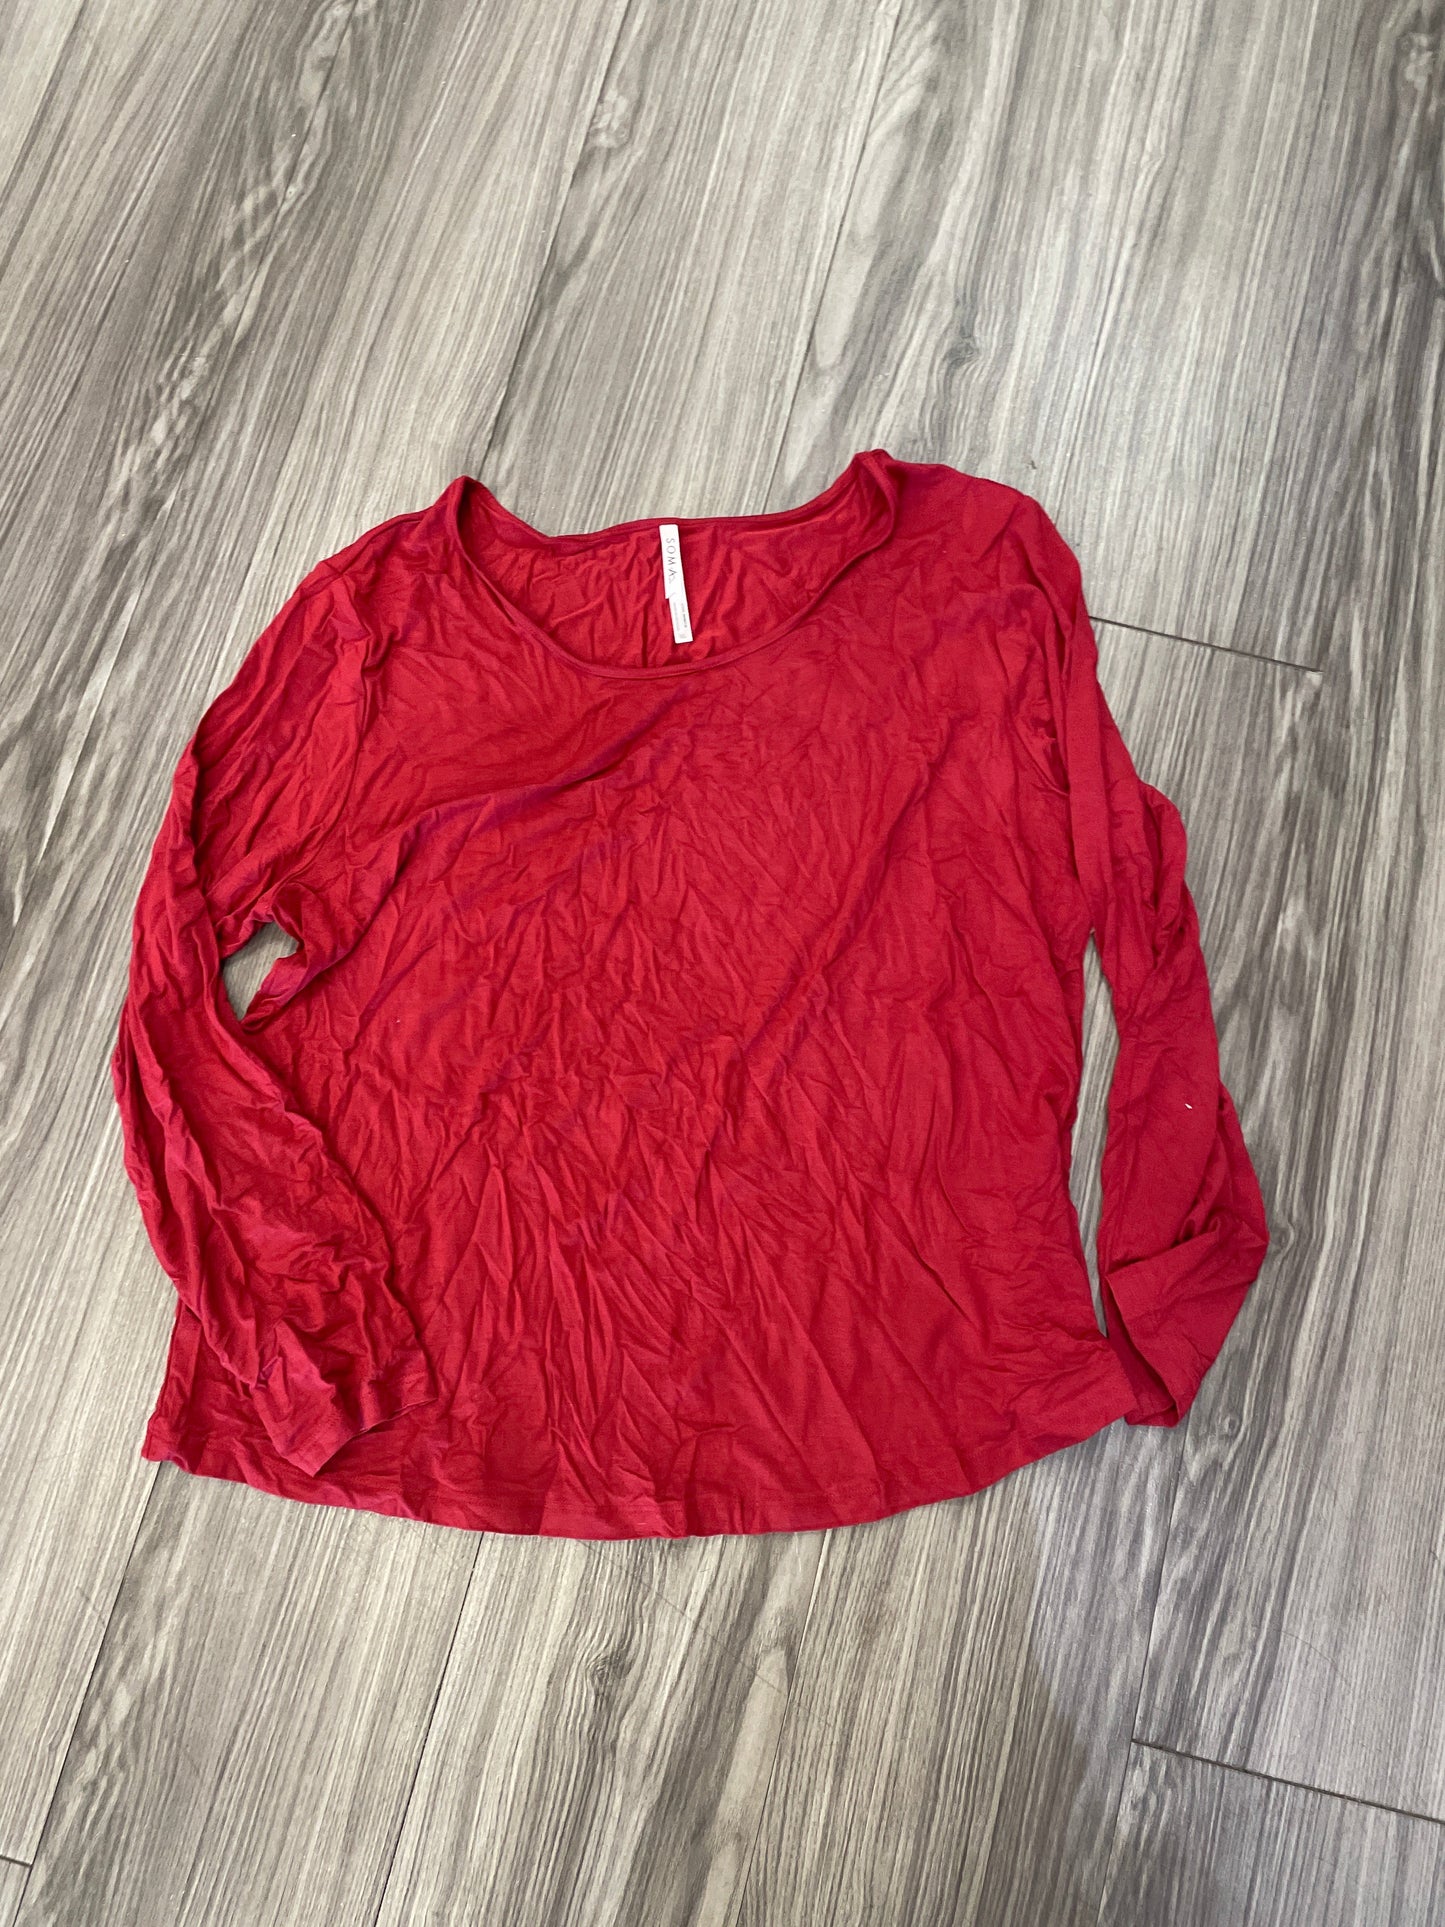 Red Top Long Sleeve Soma, Size Xl